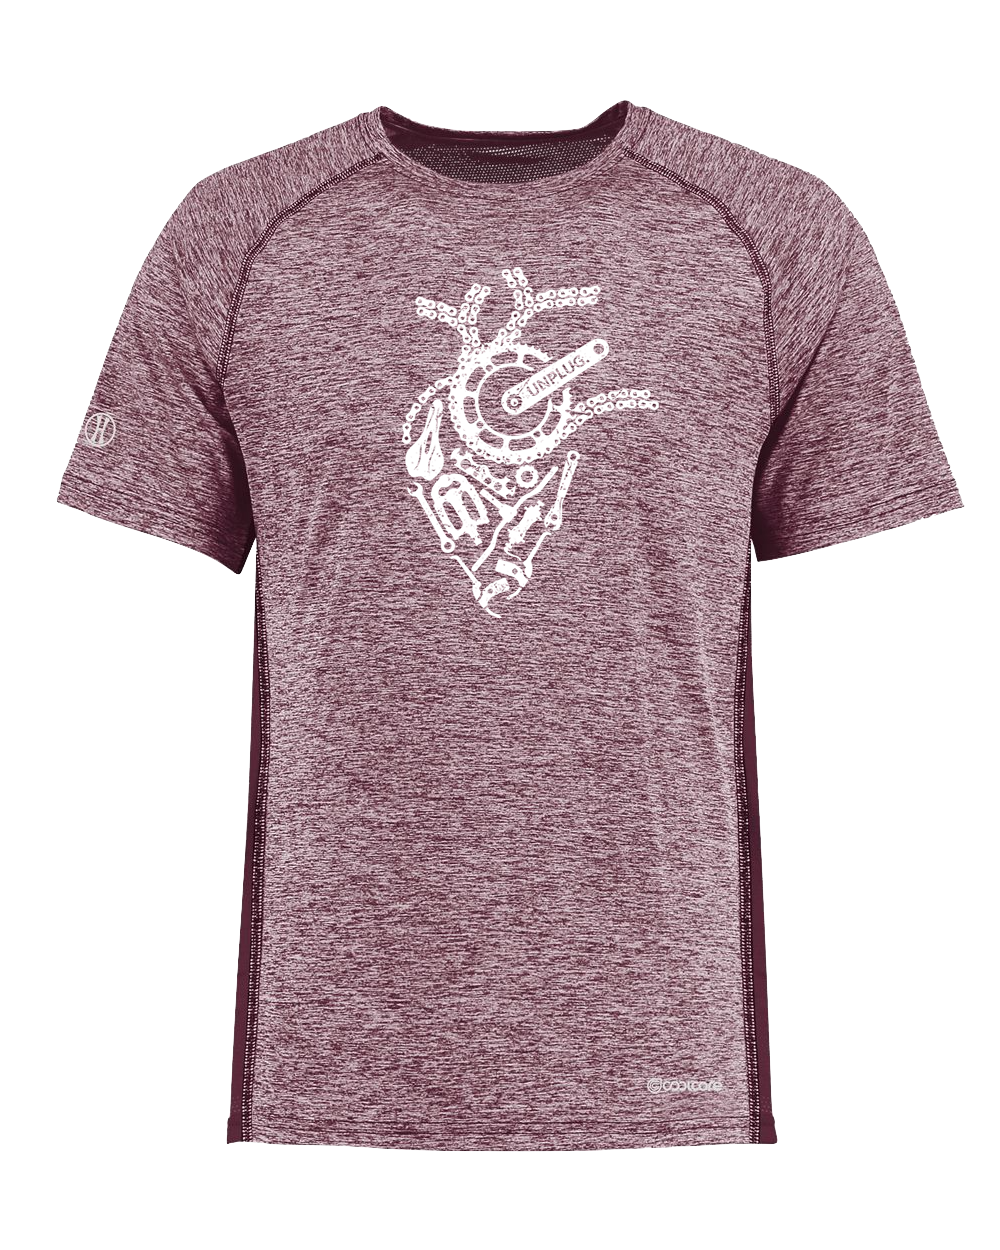 ANATOMICAL HEART (BICYCLE PARTS) Poly/Elastane High Performance T-Shirt with UPF 50+